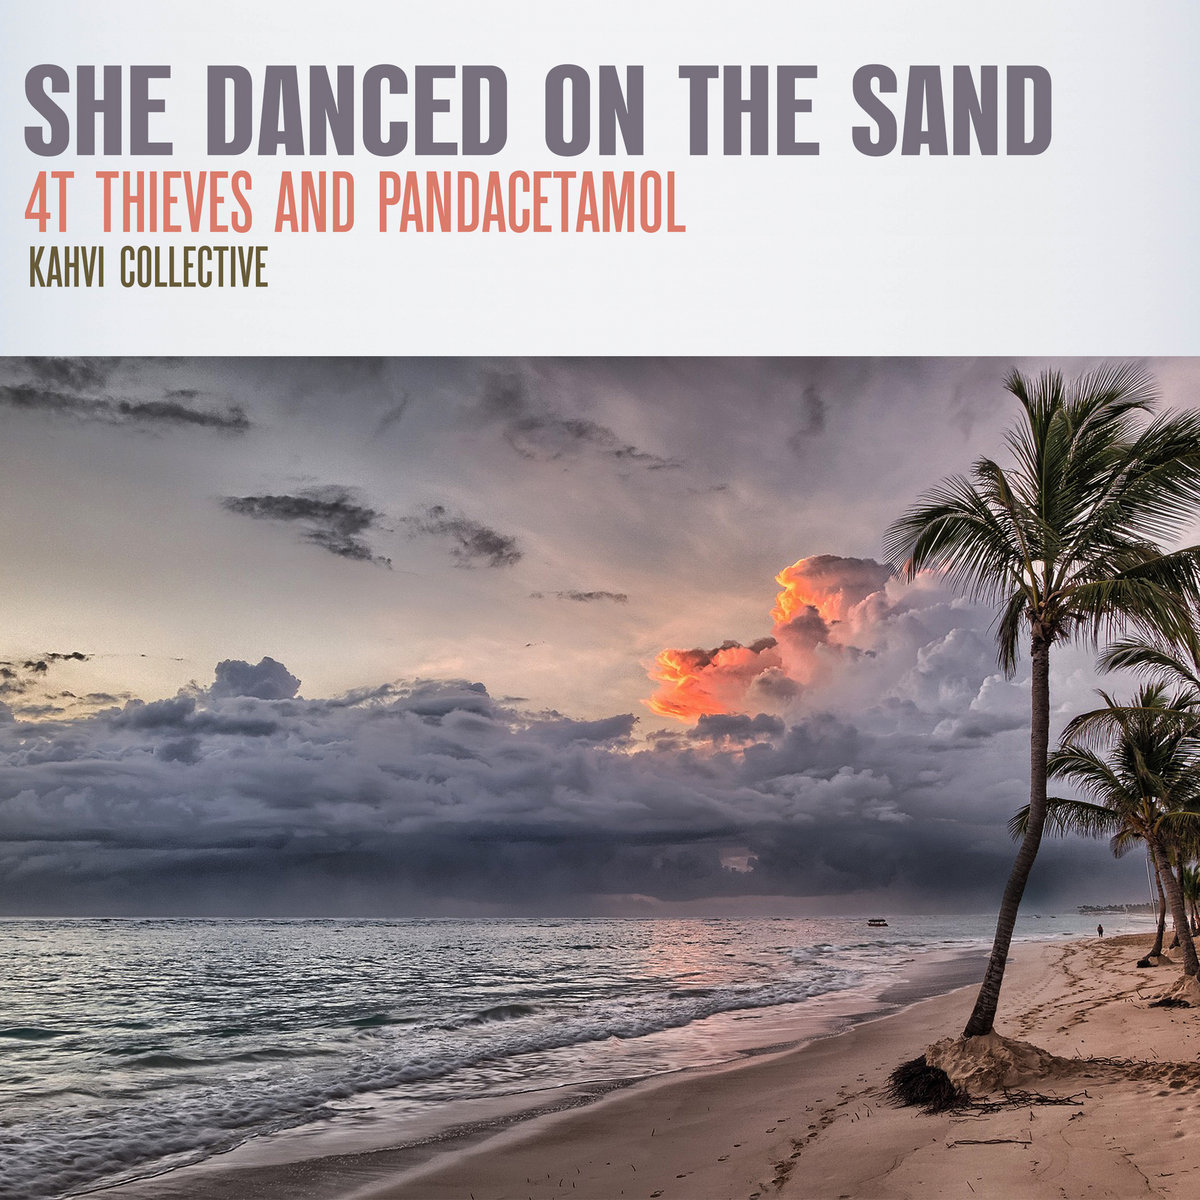 4T Thieves and Pandacetamol – She danced on the sand